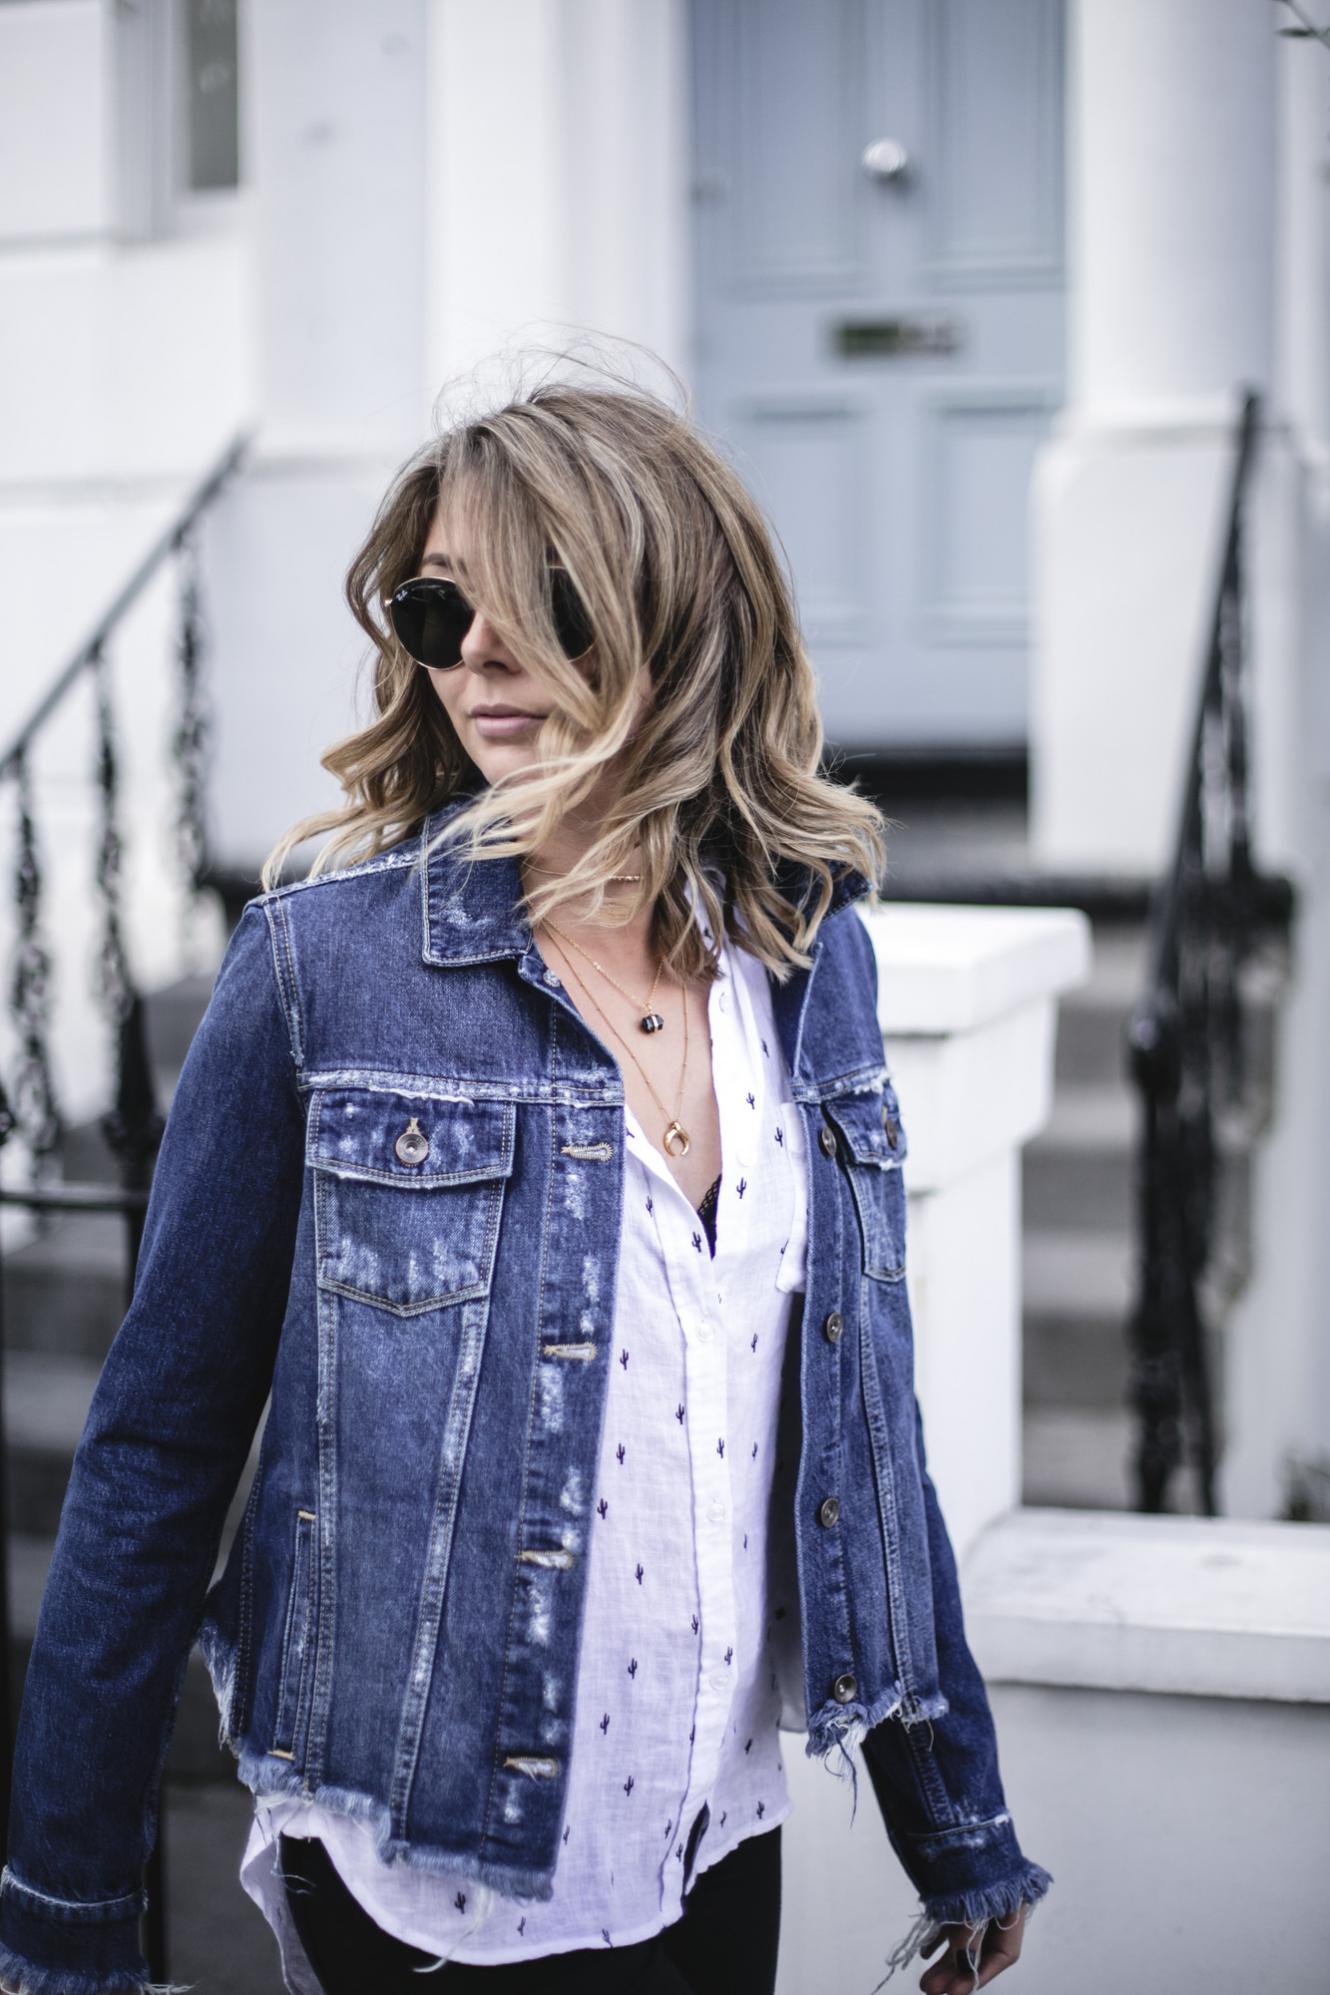 Emma Hill wears Paige frayed denim jacket, Rails white linen cactus print shirt, black lace bra, layered gold necklaces, gold Ray-Ban round metal sunglasses